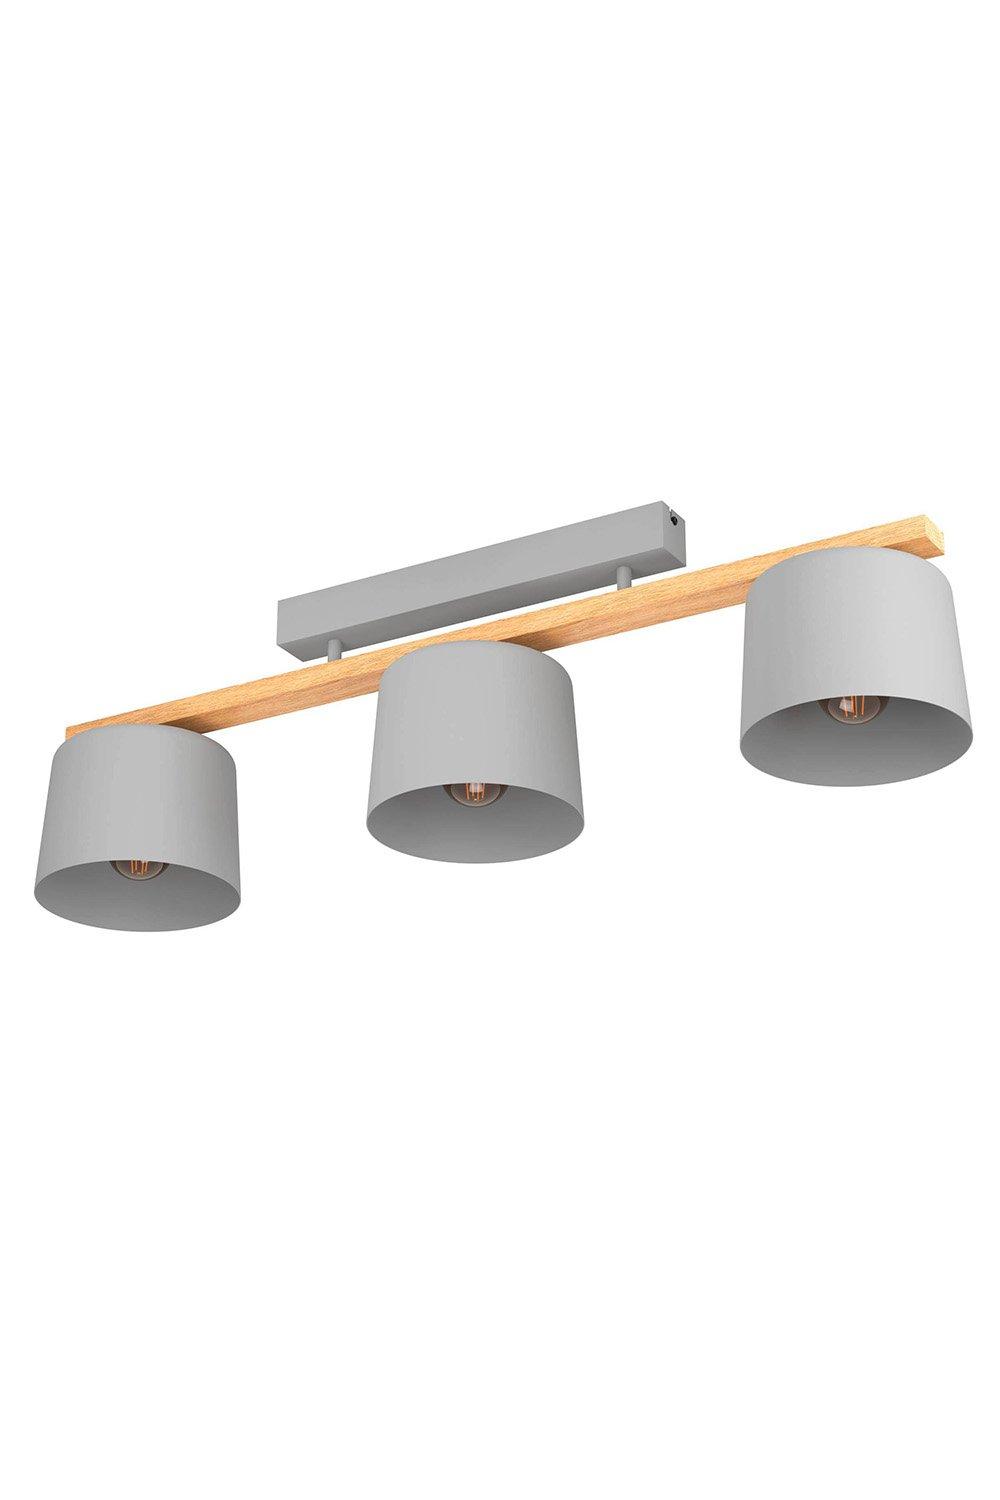 Mariel Light Grey And Natural Wood Ceiling Light